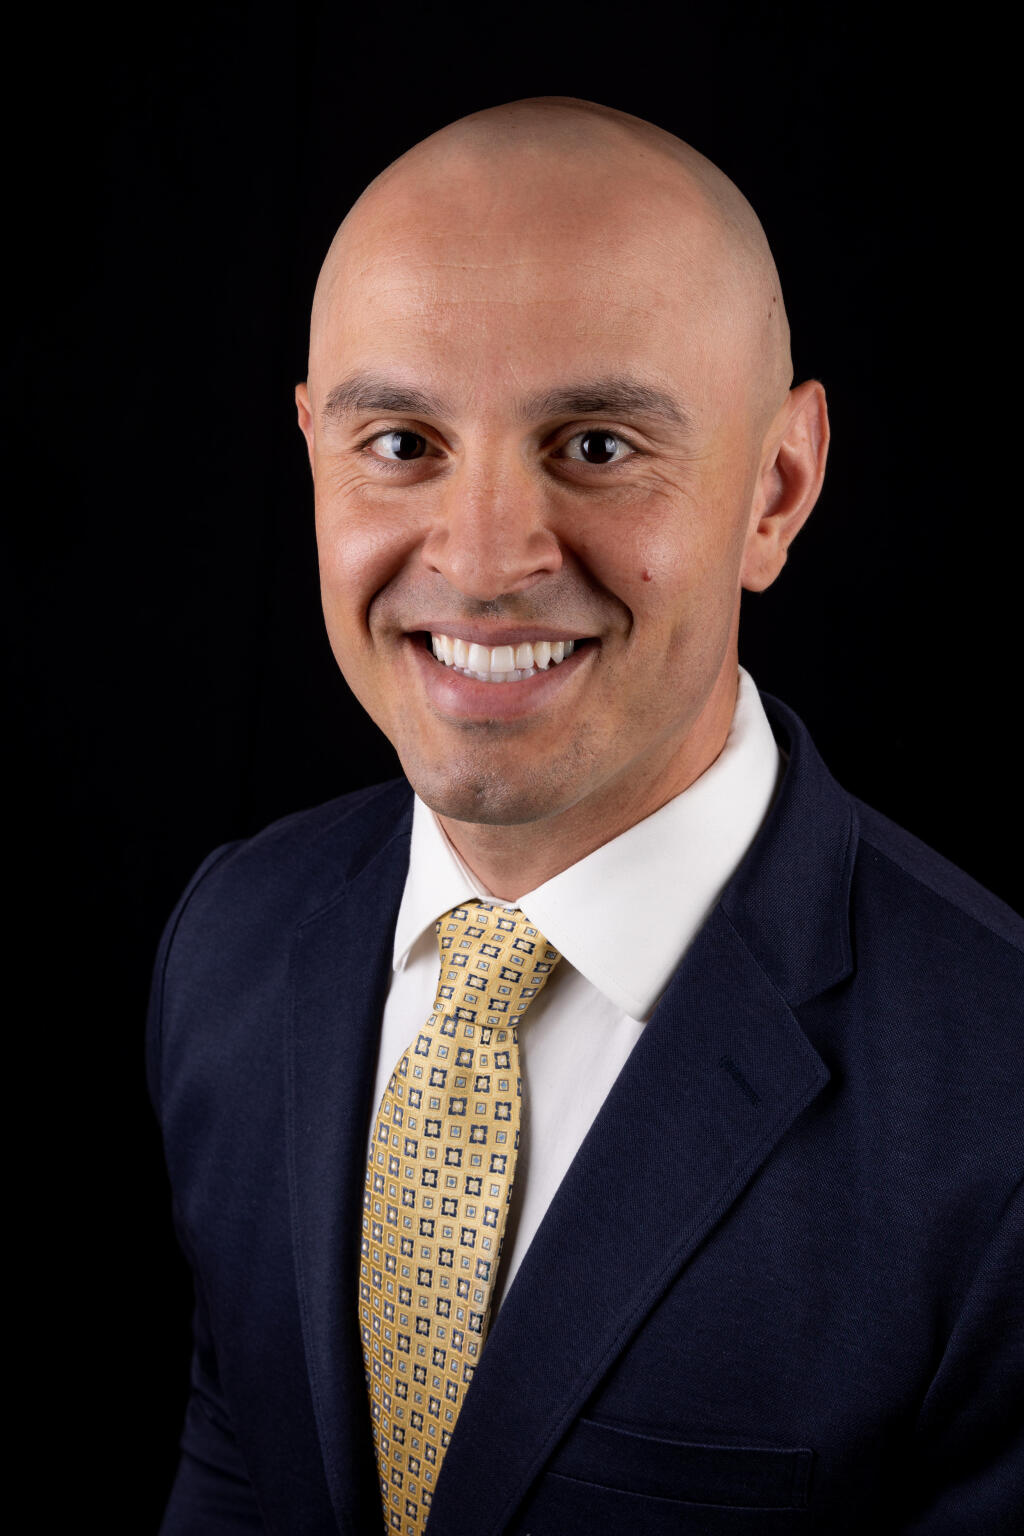 Herman G. Hernandez, 35, CEO of Hernandez Consulting in Santa Rosa is a 2022 North Bay Business Journal Forty under 40 Award winner. The winners will be recognized Tuesday, April 19 event from 4 to 6:30 p.m. at The Barlow in Sebastopol.